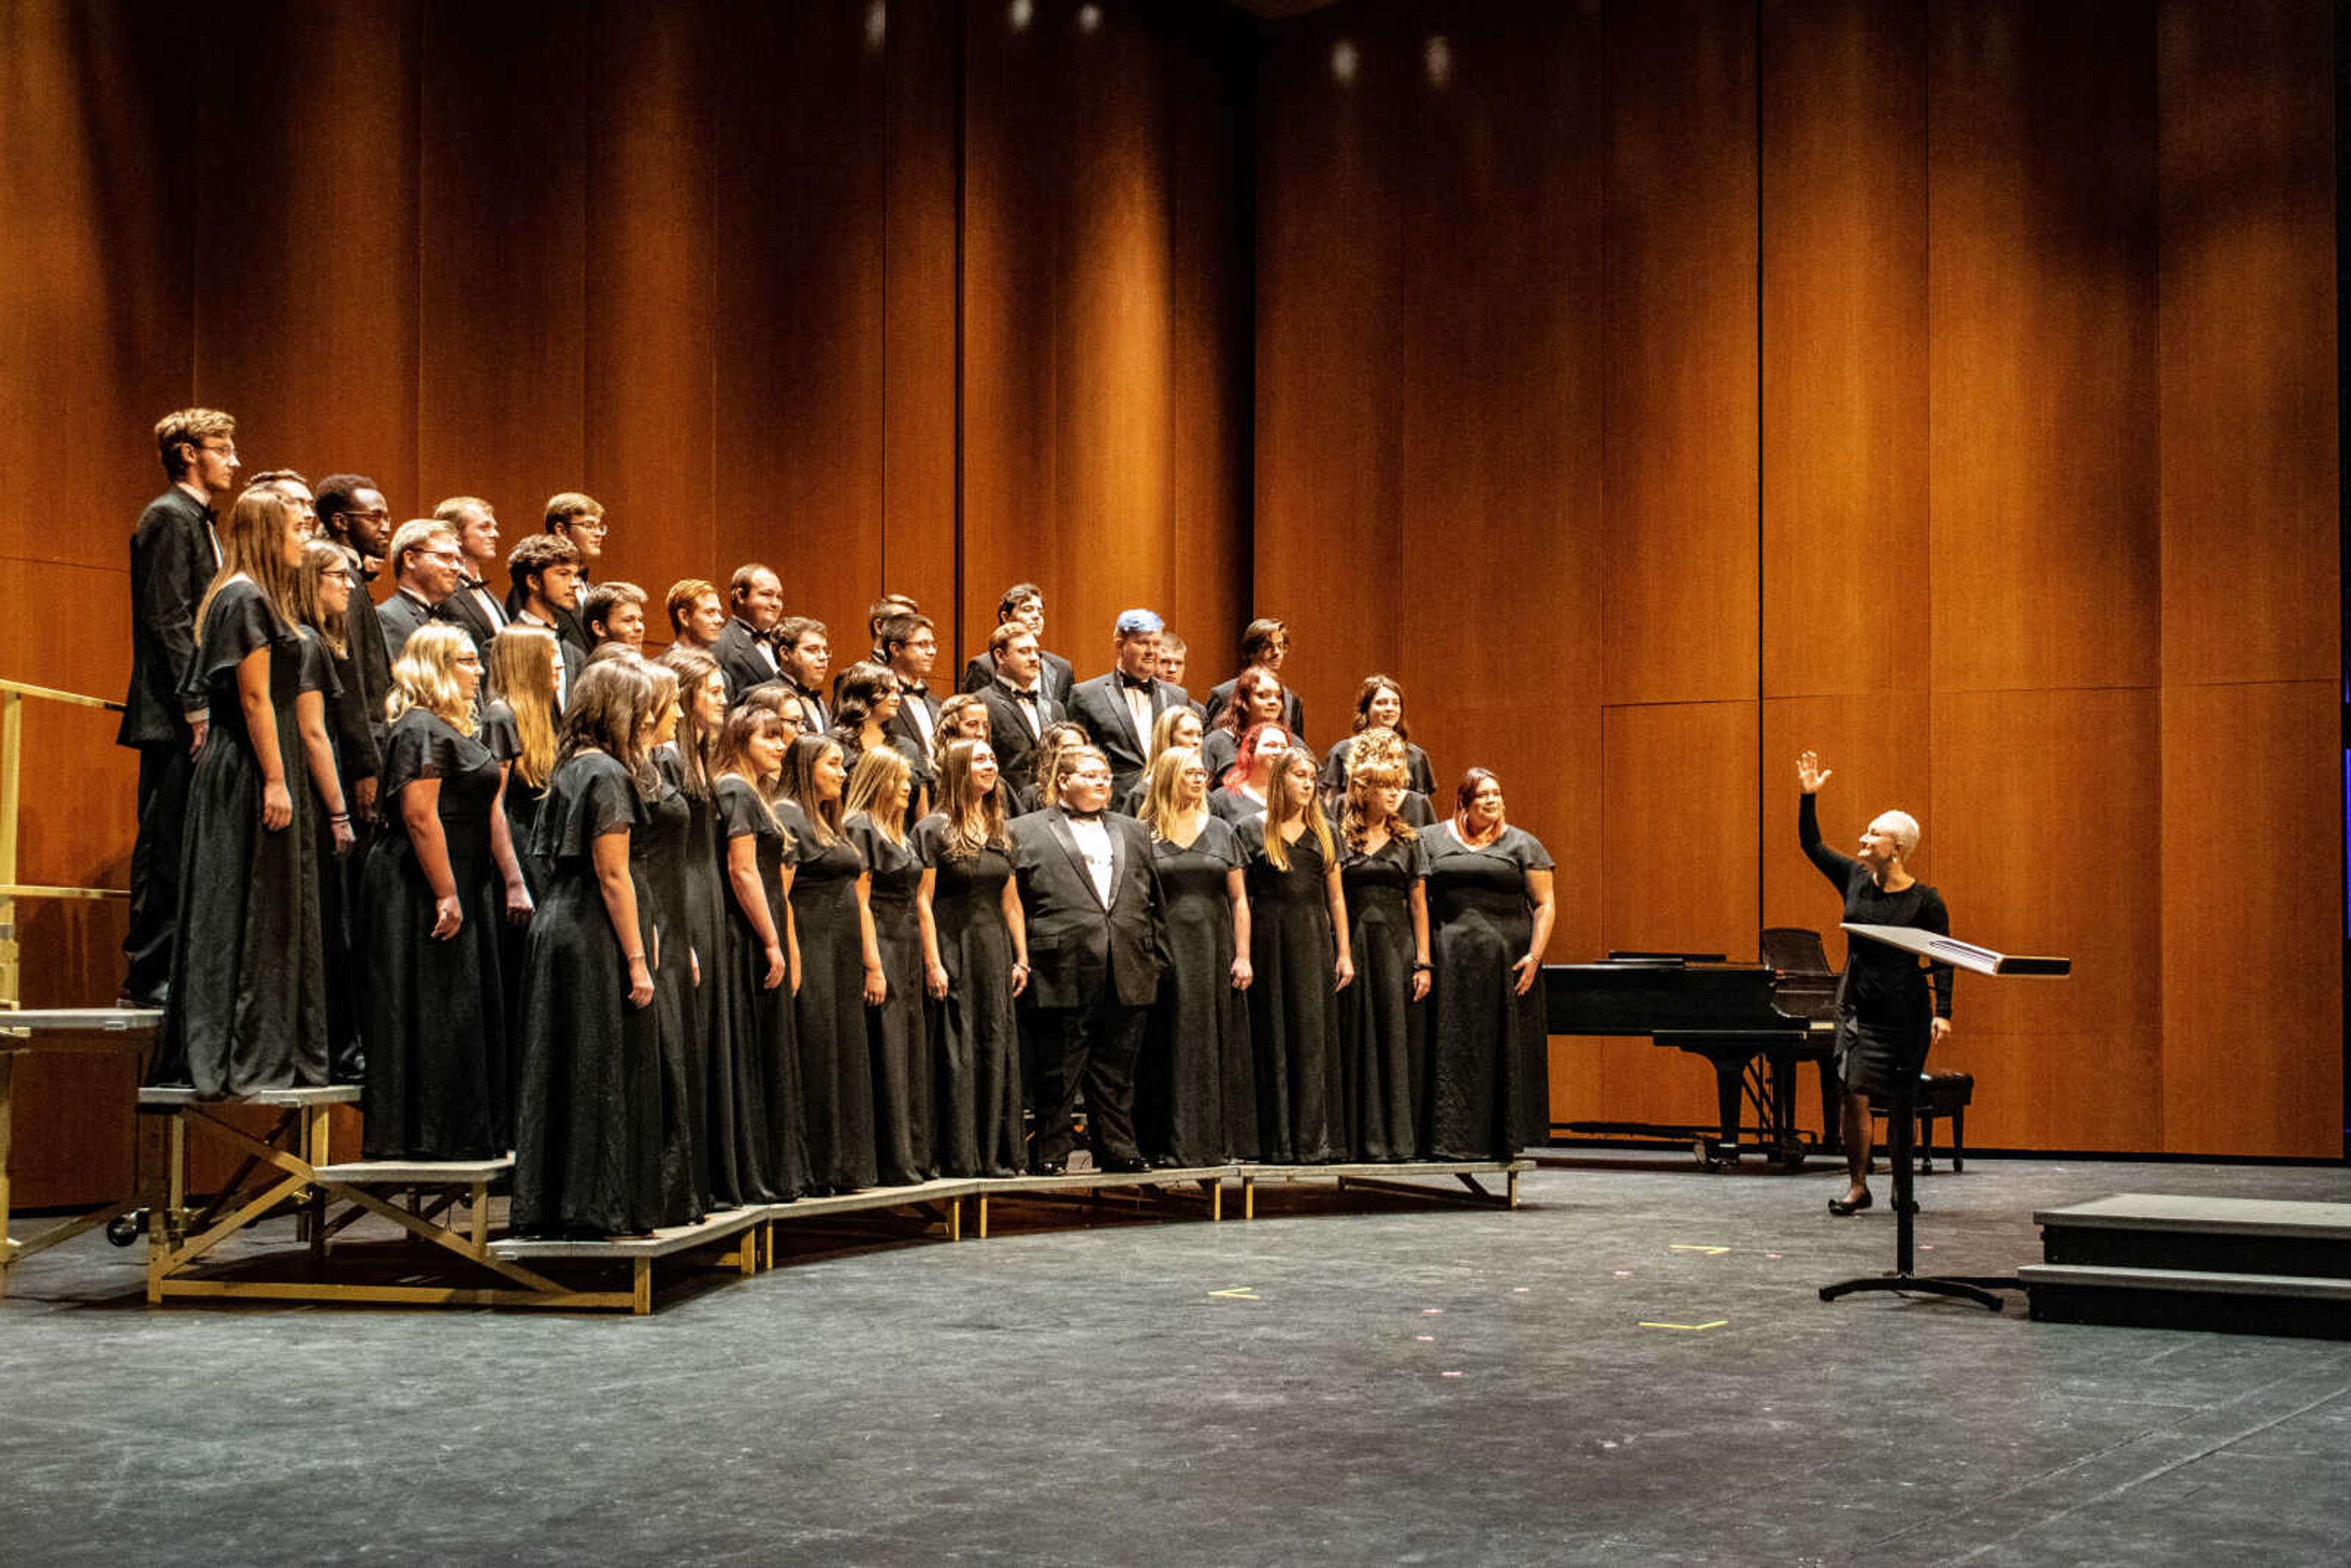 Dr. Barbara Lamont presenting her ensemble of The University and Chamber Choirs during their annual fall concert "The World Around Us." Oct. 22nd 2019 Bedell Performance Hall, Southeast Missouri State University.